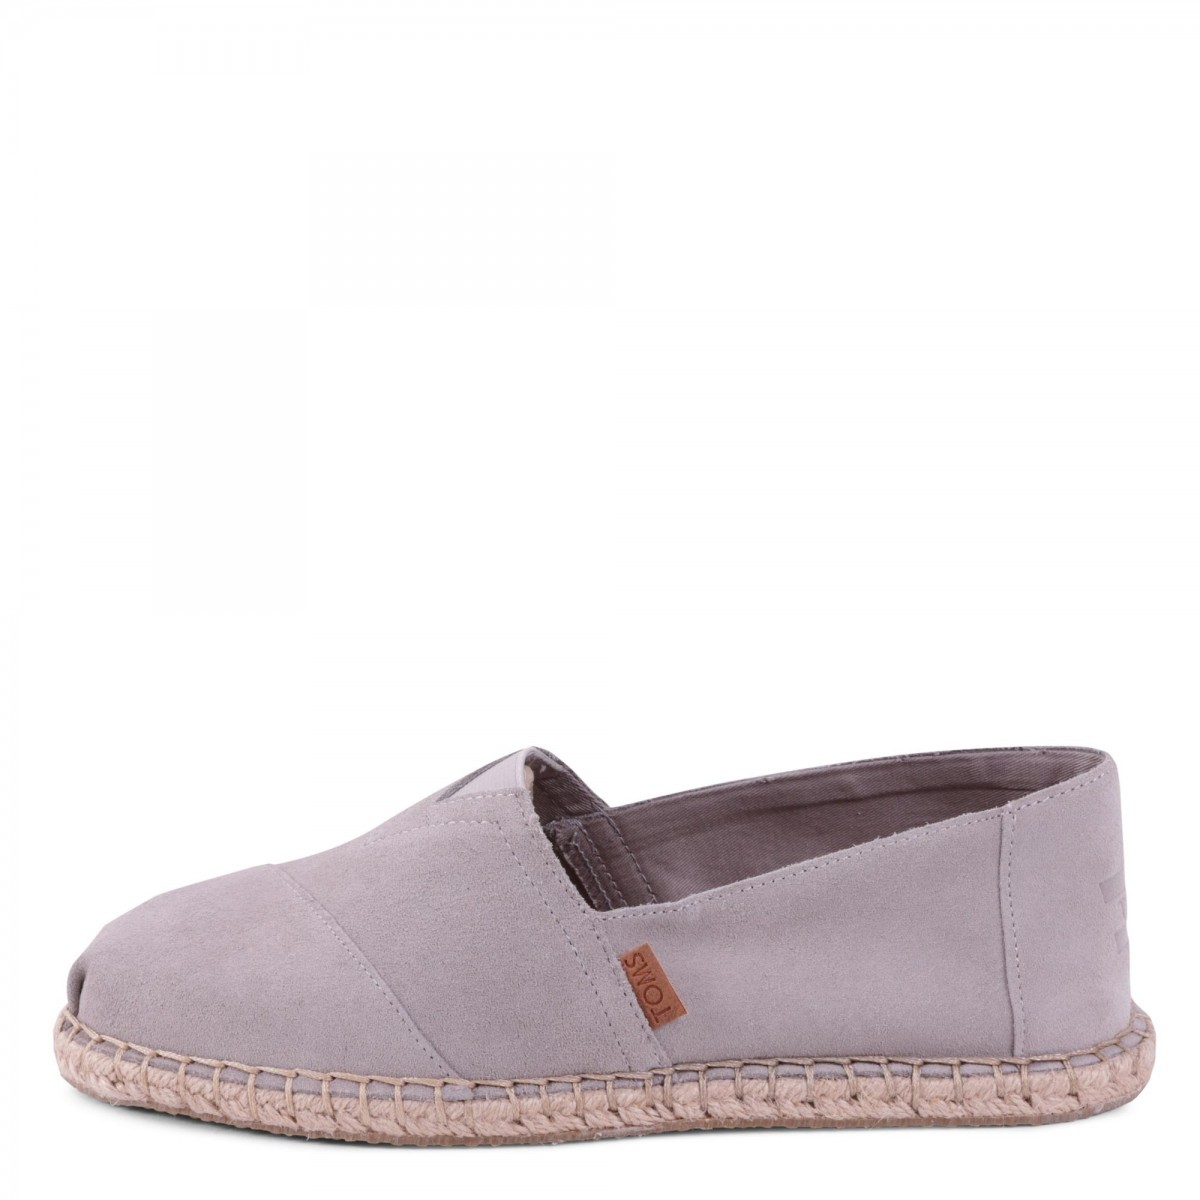 CLASSIC DRIZZLE GREY SUEDE / BLANKET STITCH